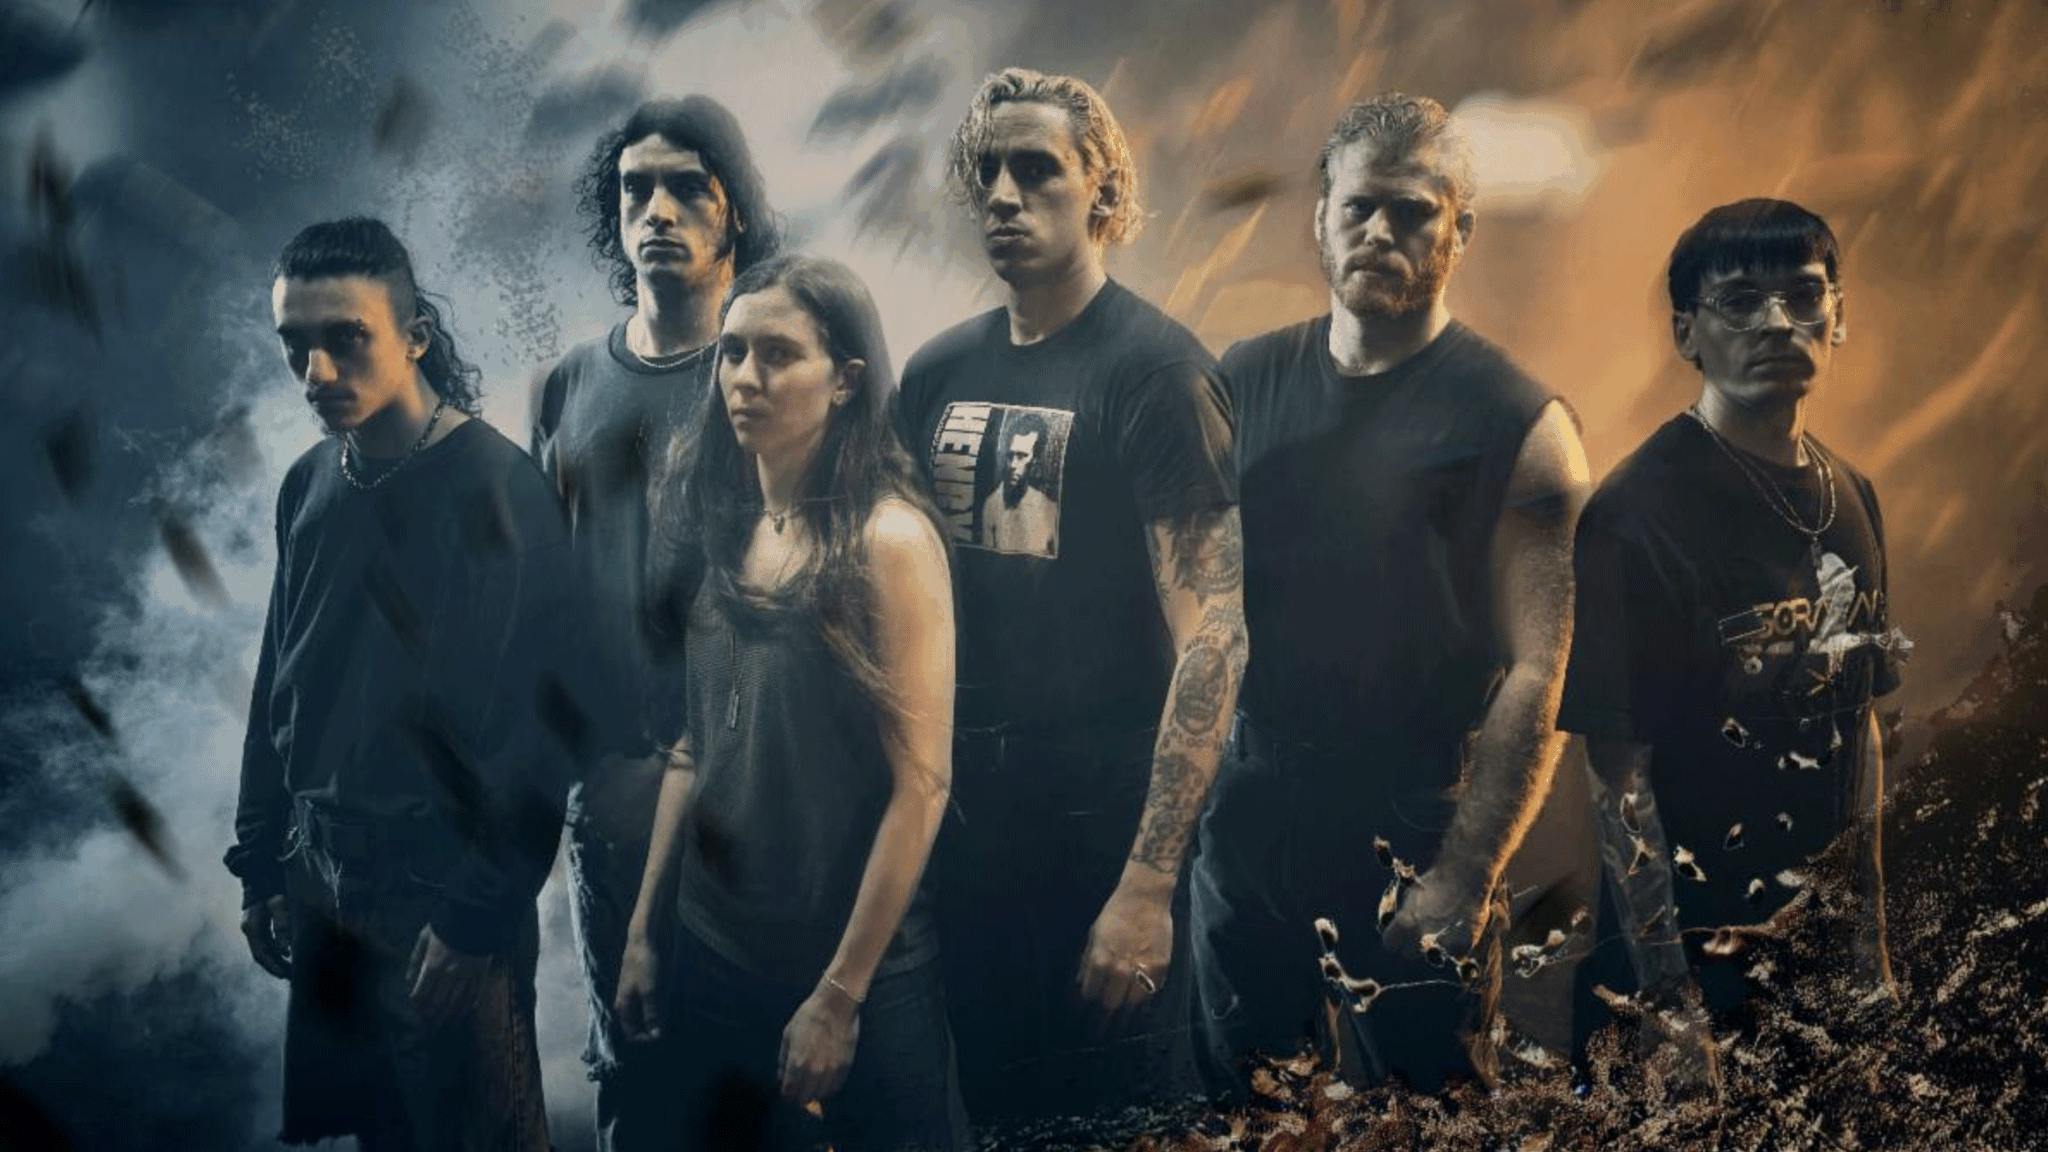 Code Orange: “The Above comes from a more personal, emotional point of view… it completes the journey we started on I Am King”